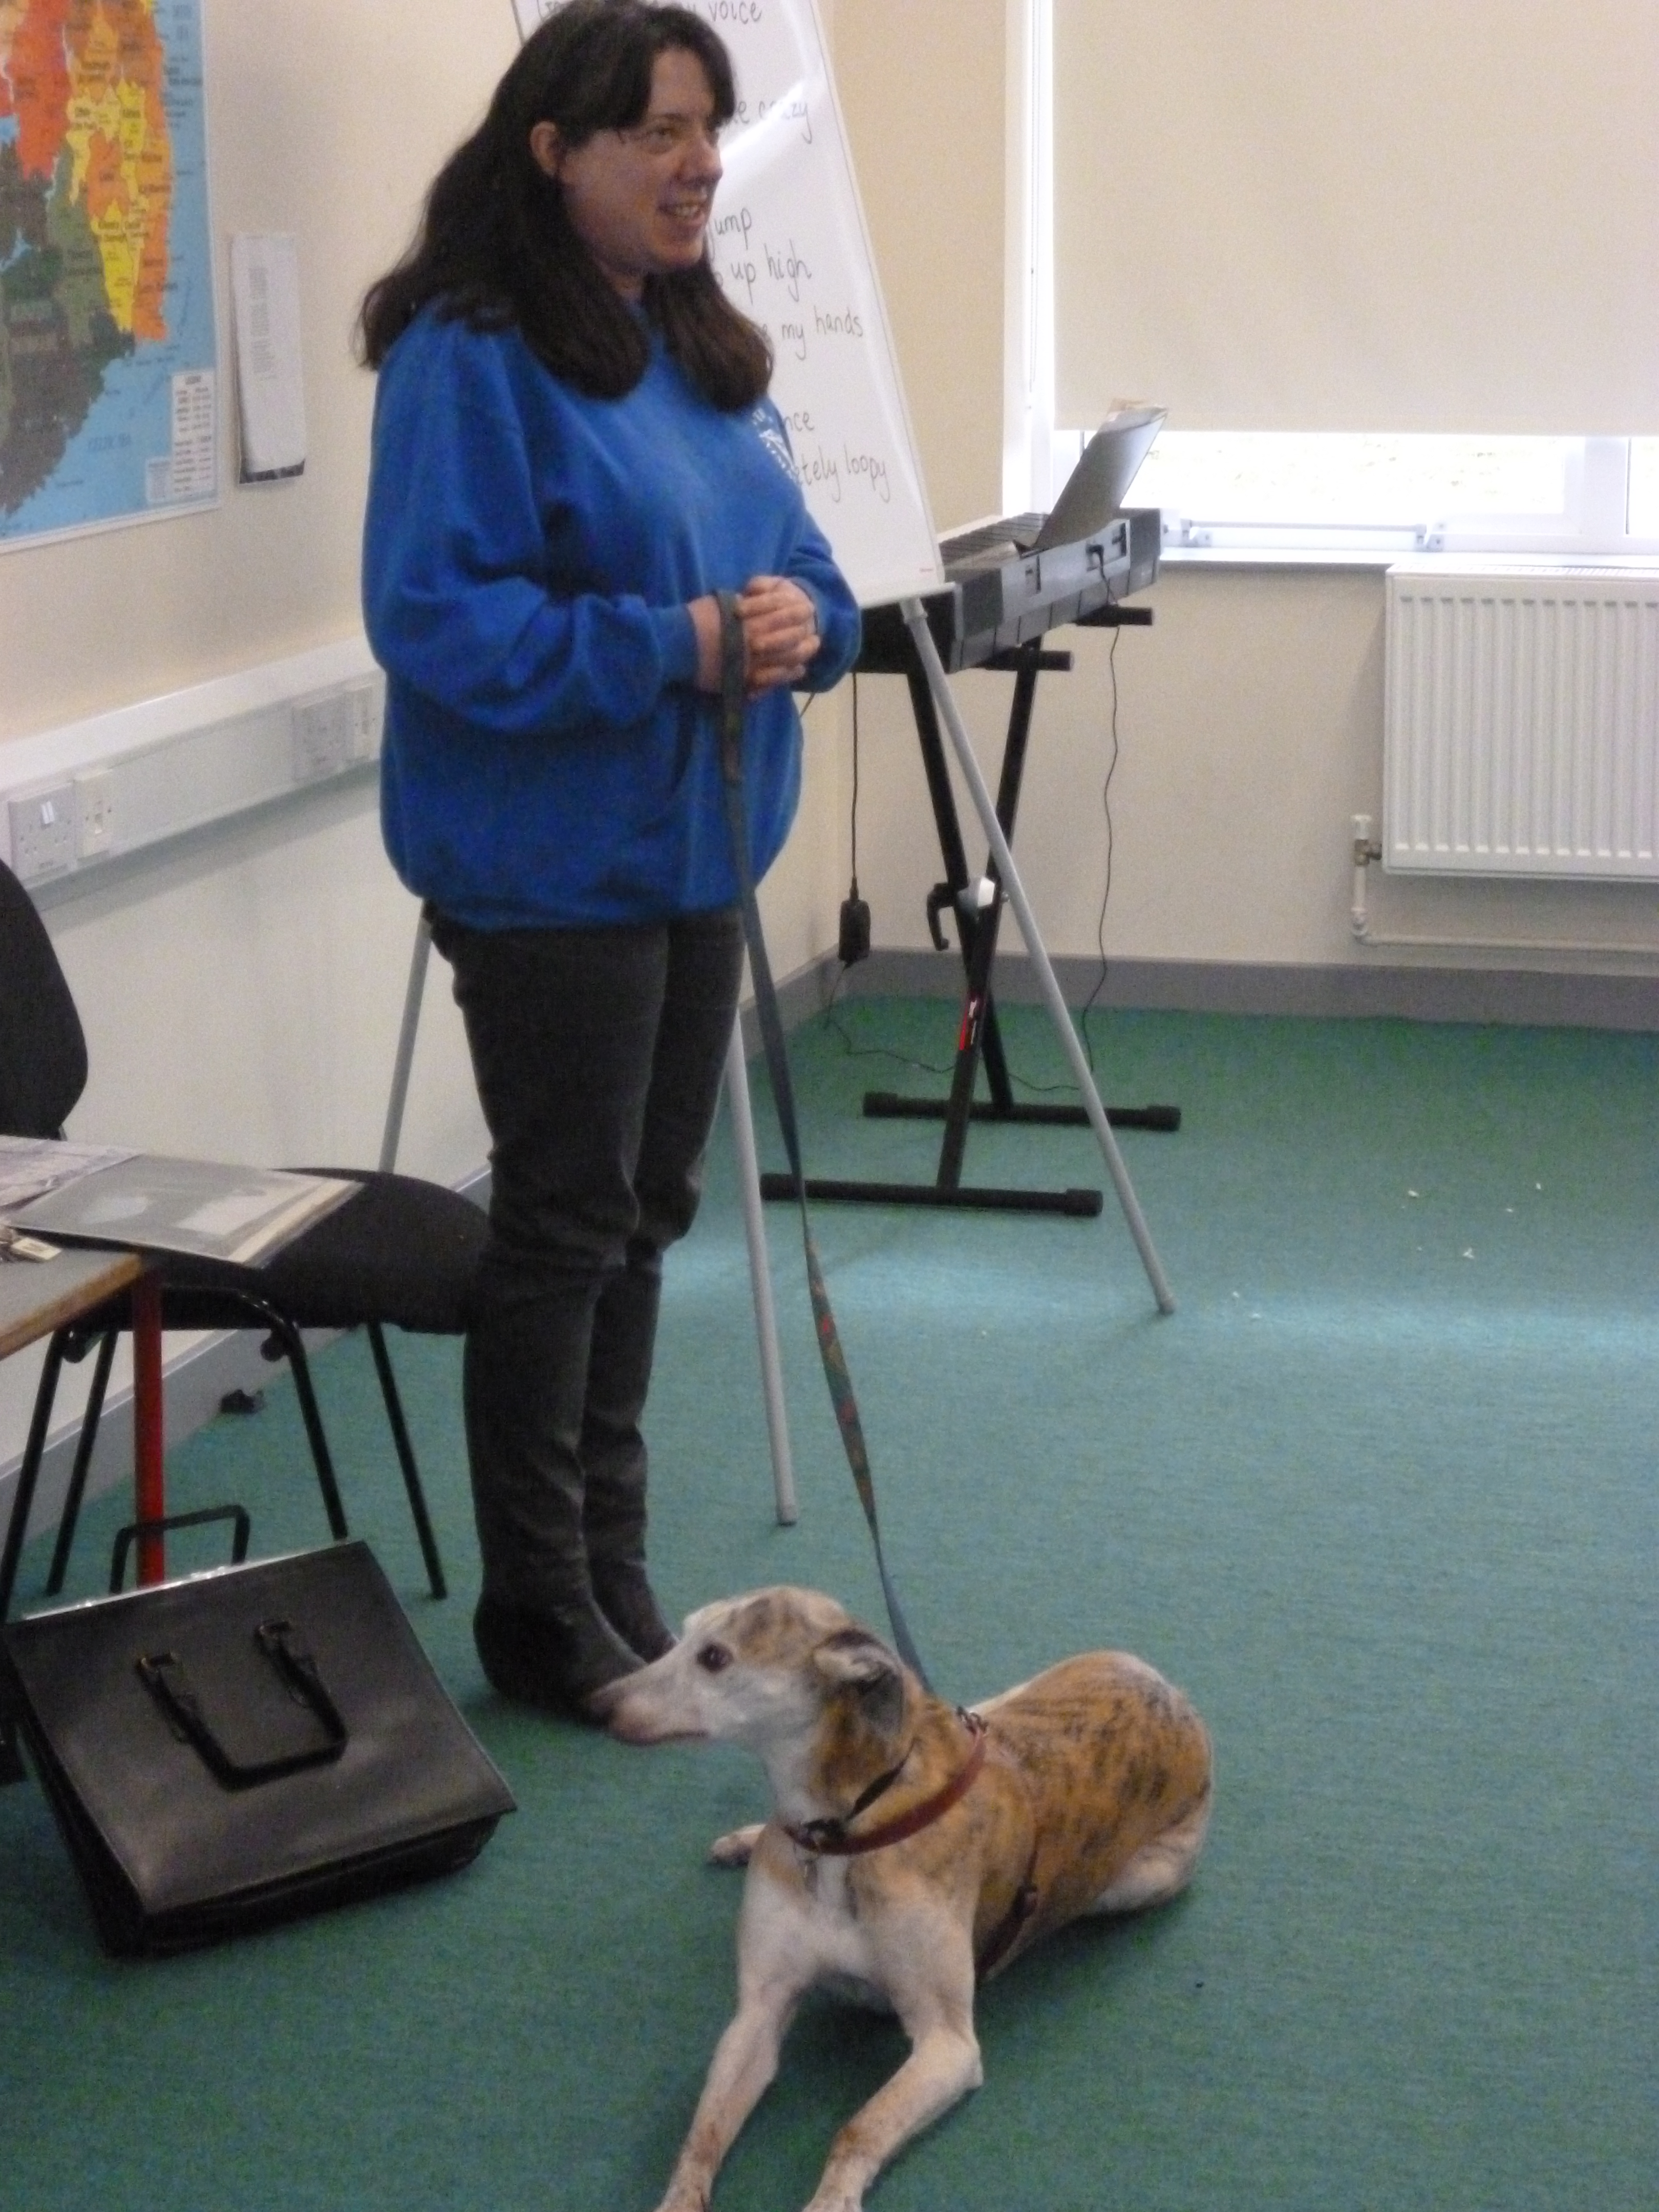 Visit from Kildare Animal Foundation « Athy Model School